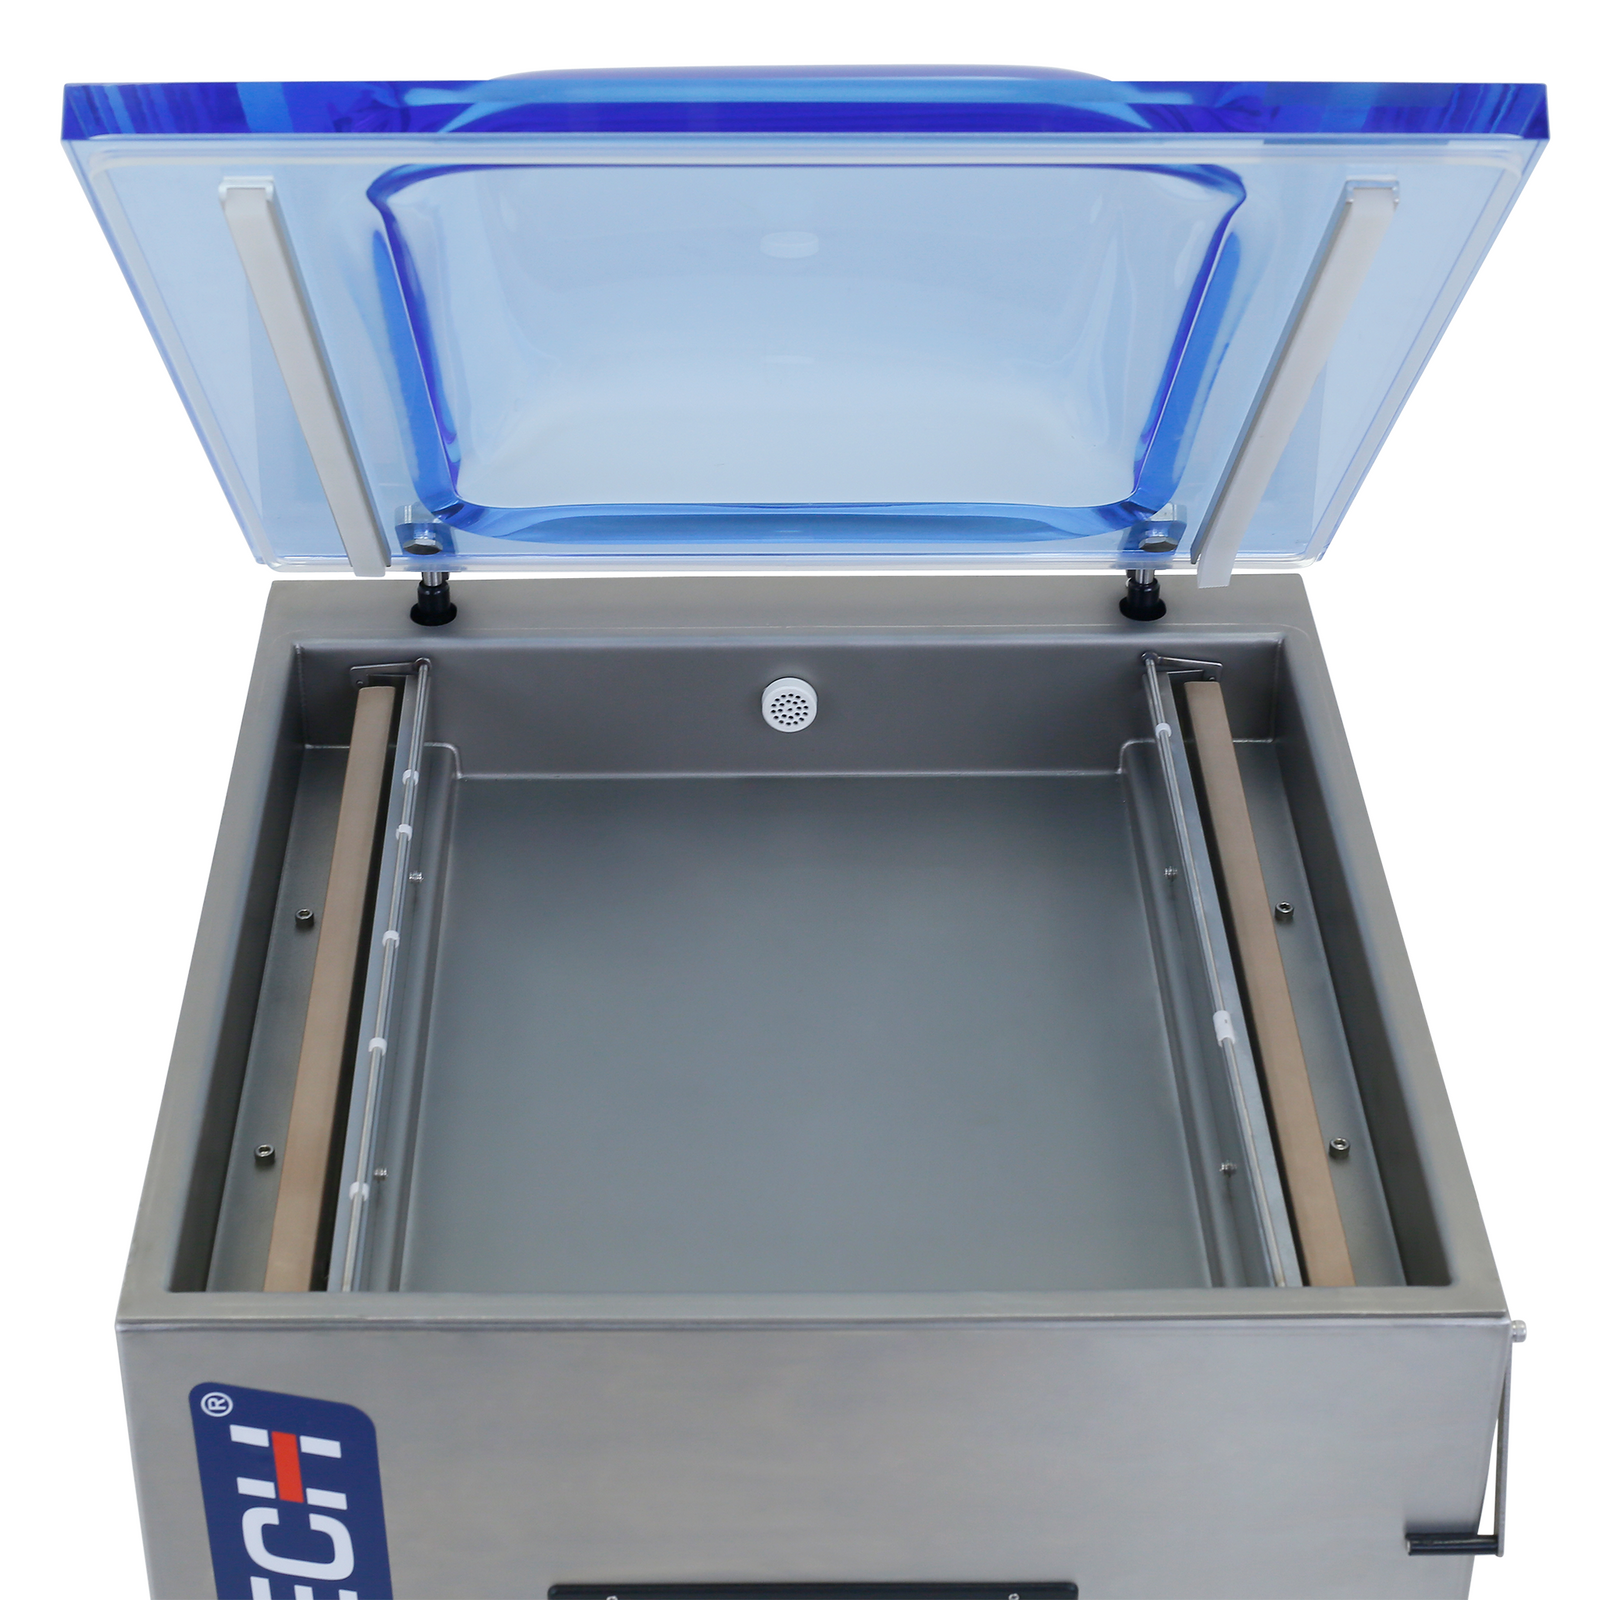 Commercial self standing single chamber vacuum sealer with the lid open. Shows the interior of the chamber and the 2 sealing bars